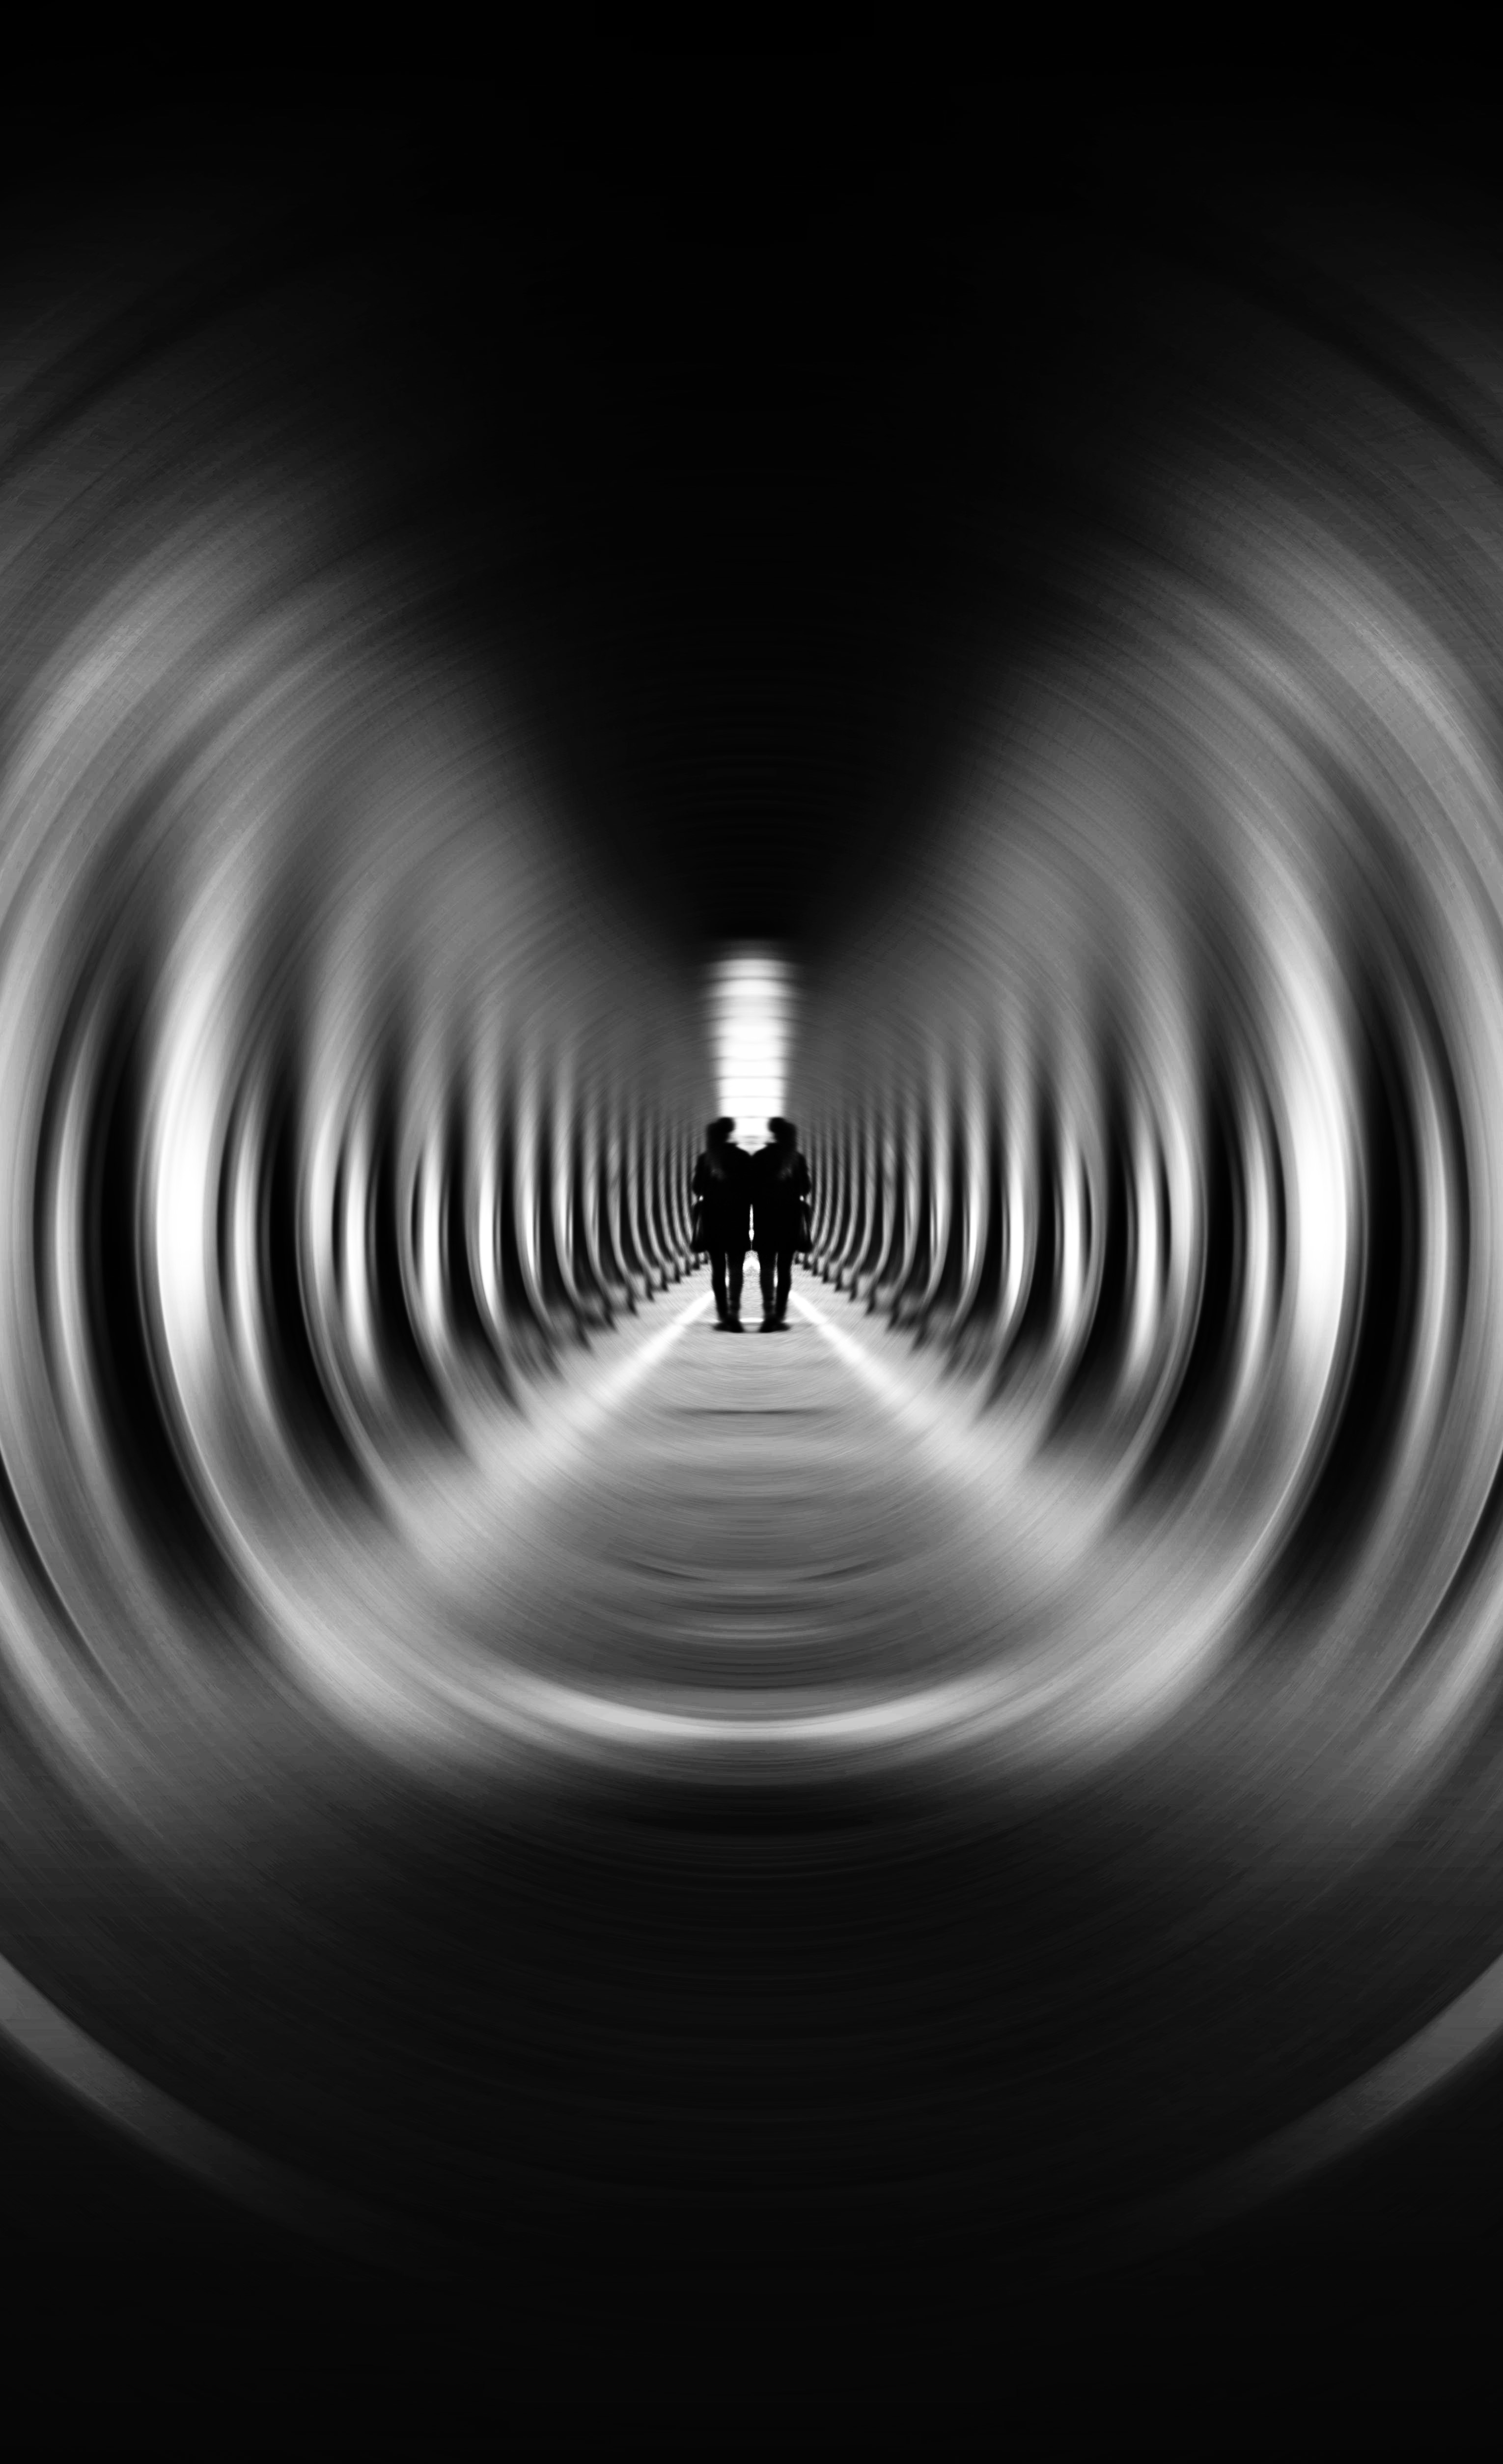 bw, illusion, miscellanea, miscellaneous, silhouettes, blur, smooth, chb, tunnel images